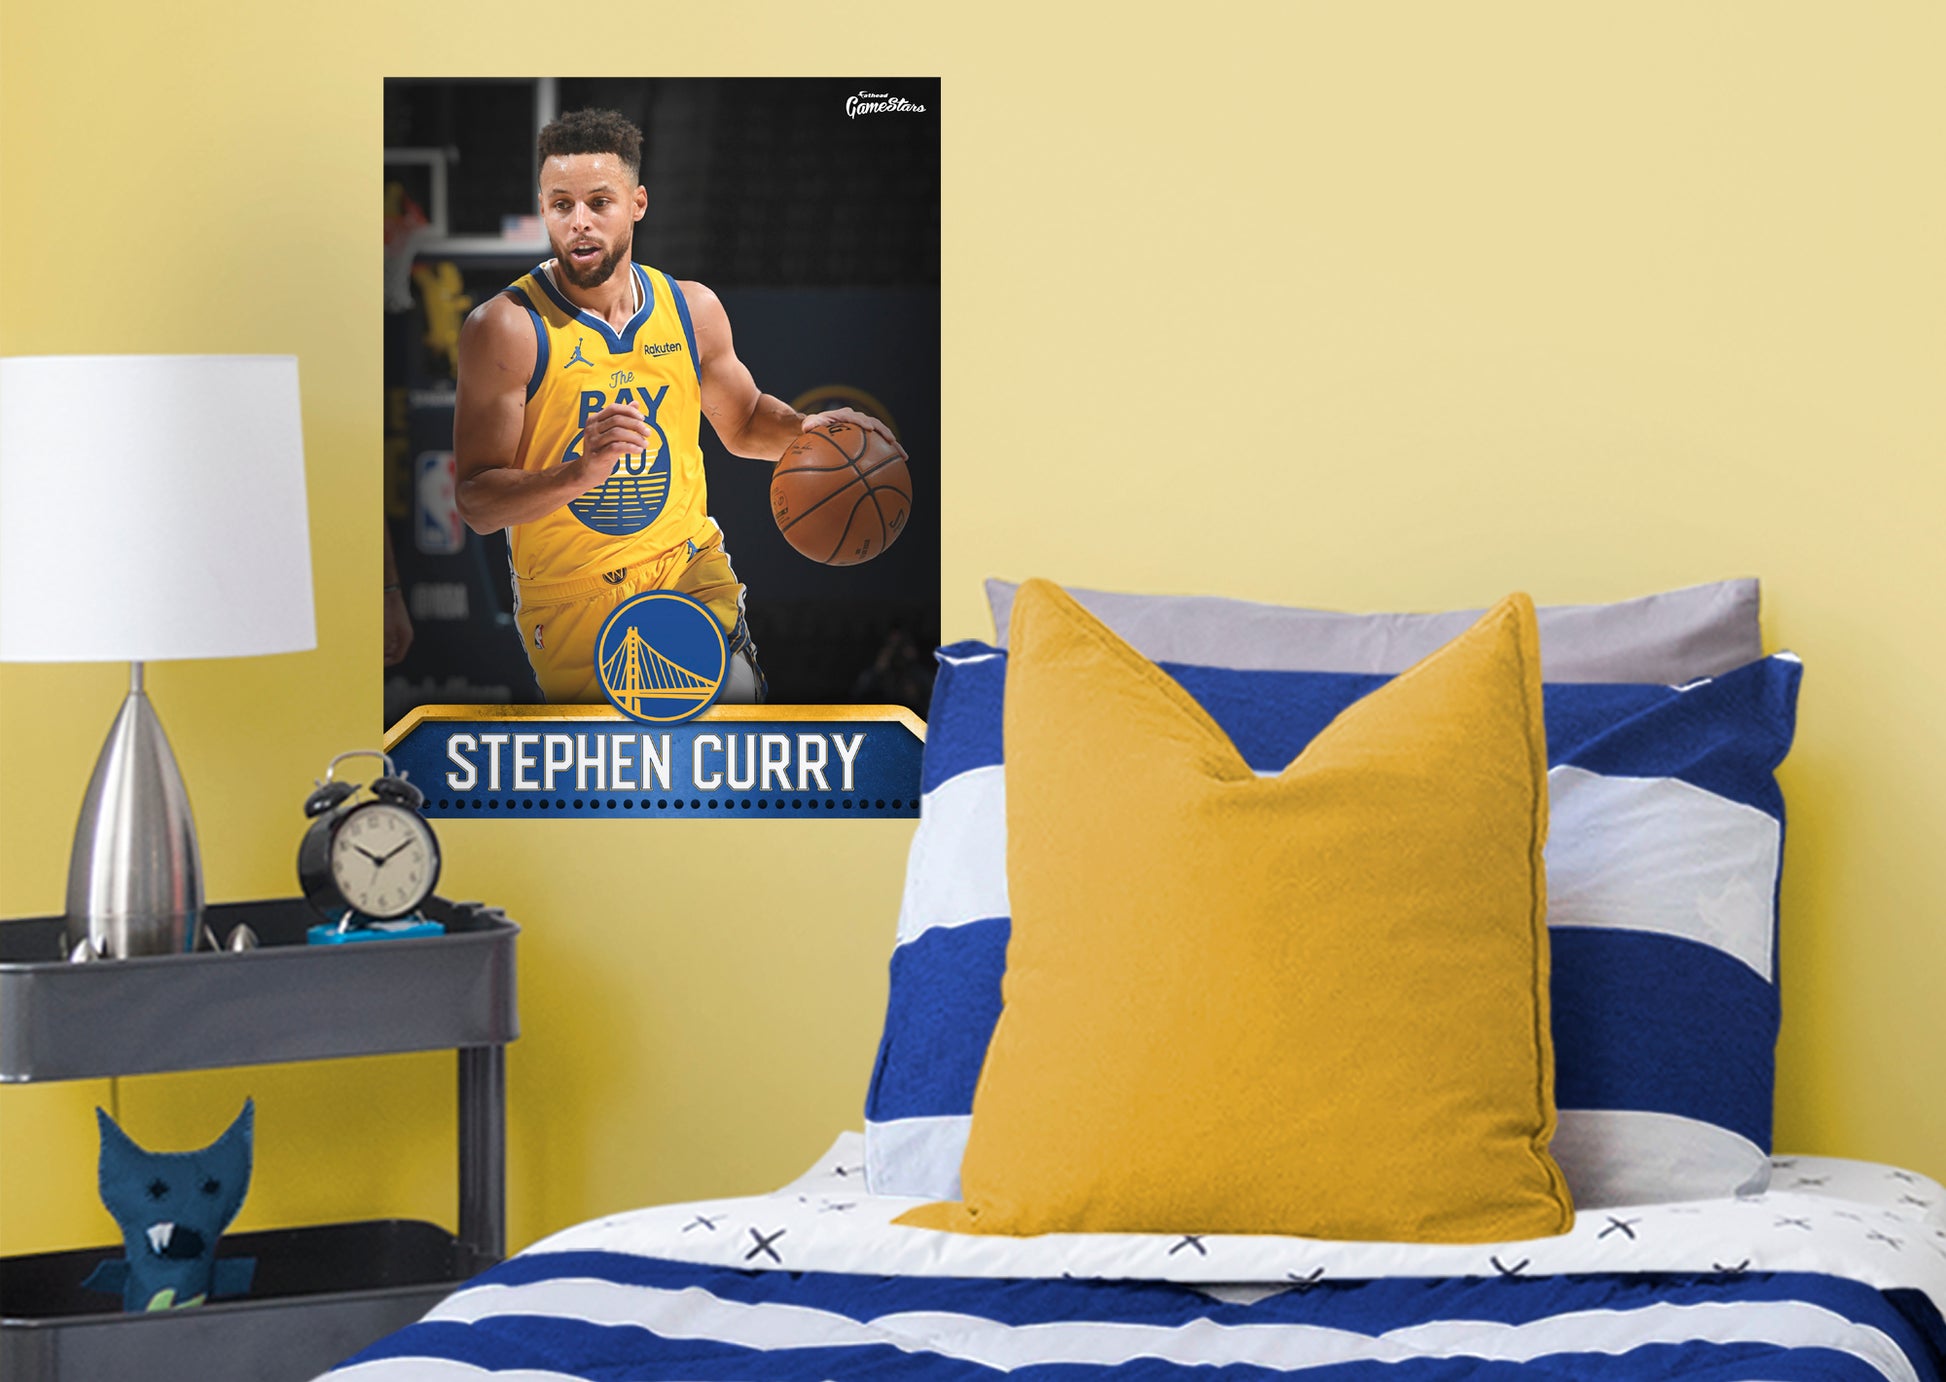 Golden State Warriors: Stephen Curry 2021 Black Jersey - NBA Removable Adhesive Wall Decal Life-Size Athlete +2 Wall Decals 34W x 78H